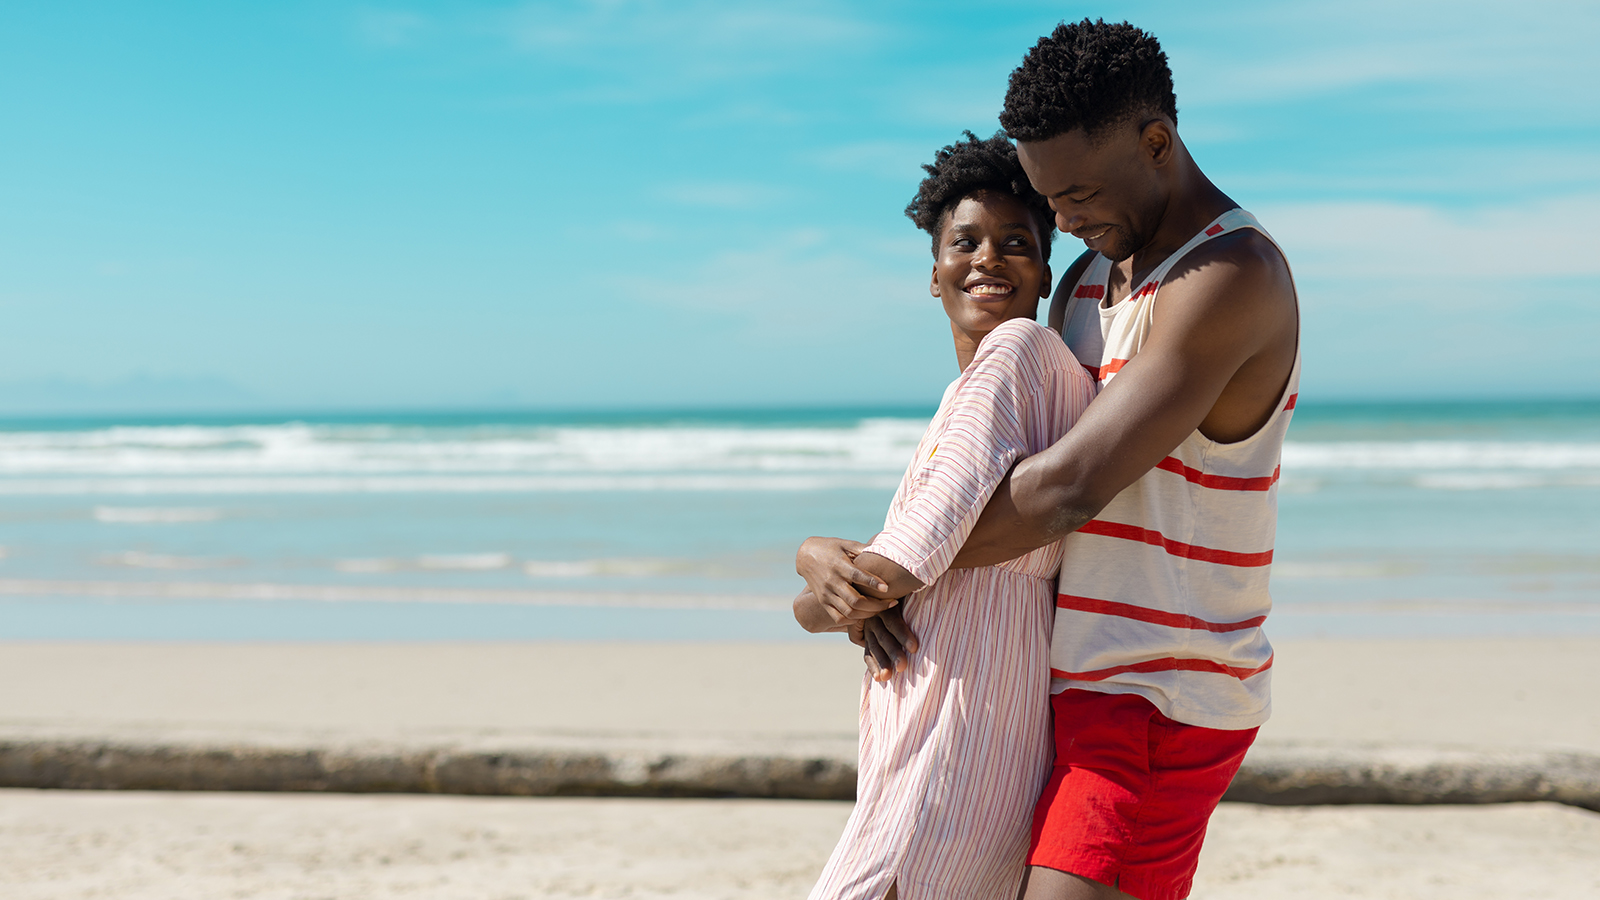 Side view of african american young man embracing smiling girlfriend at beach against blue sky. nature, summer, unaltered, beach, love, togetherness, lifestyle, enjoyment and holiday concept.